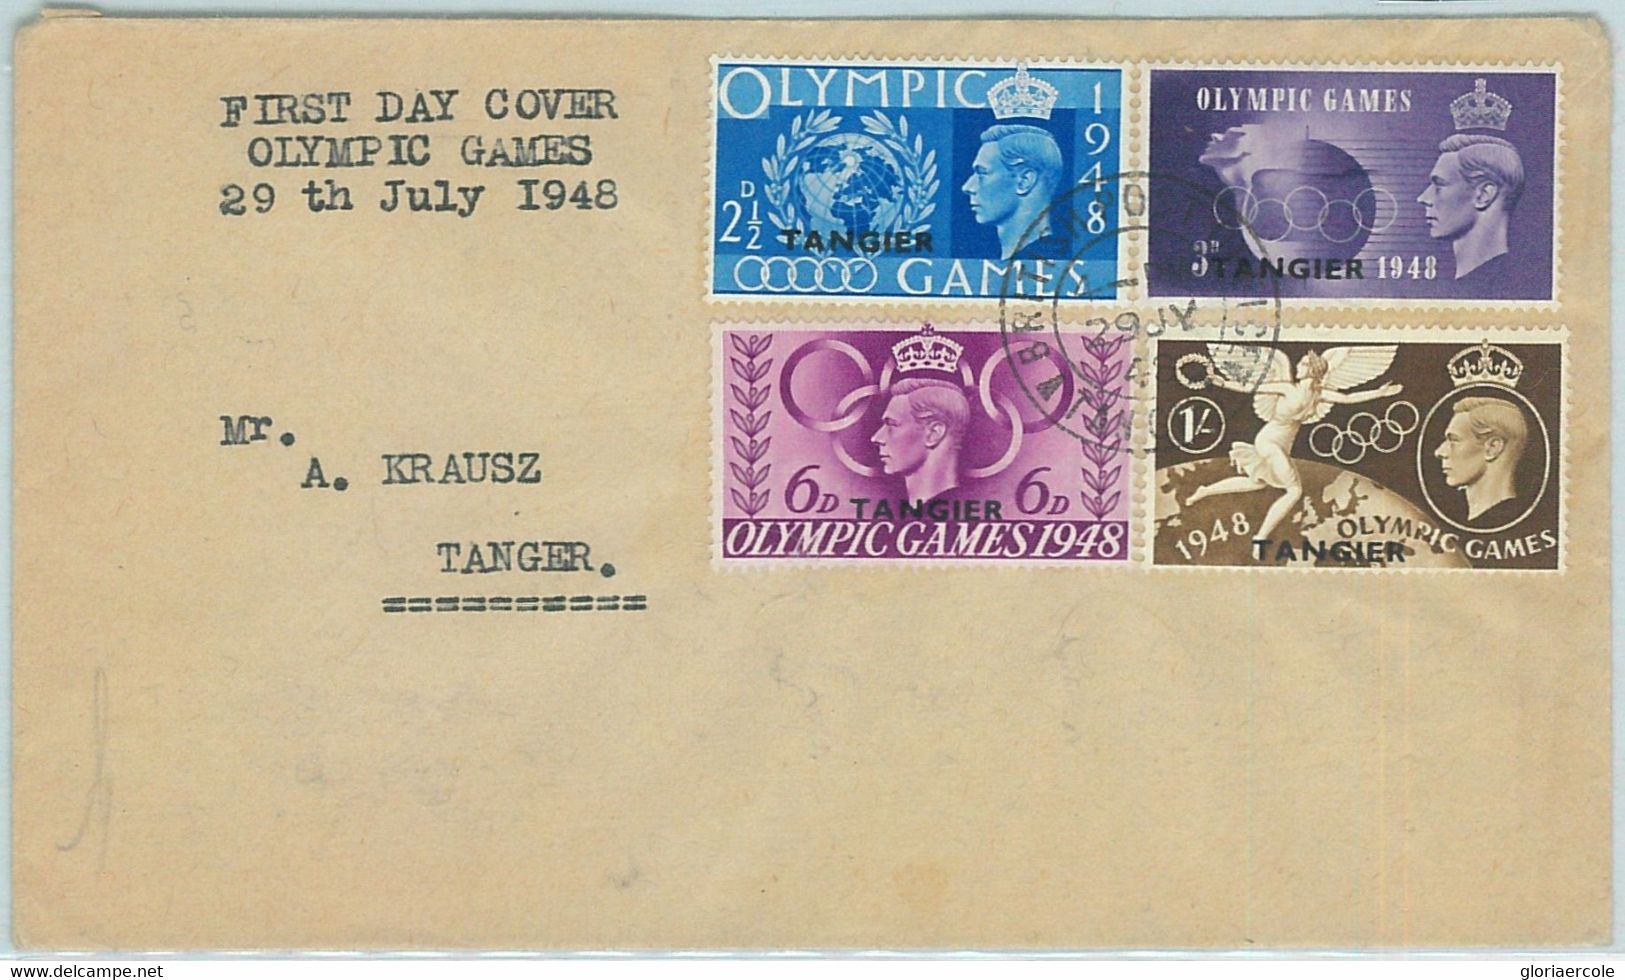 68020 -  TANGIER - POSTAL HISTORY -  1948  Olympic Games  FDC Cover! - Ete 1948: Londres